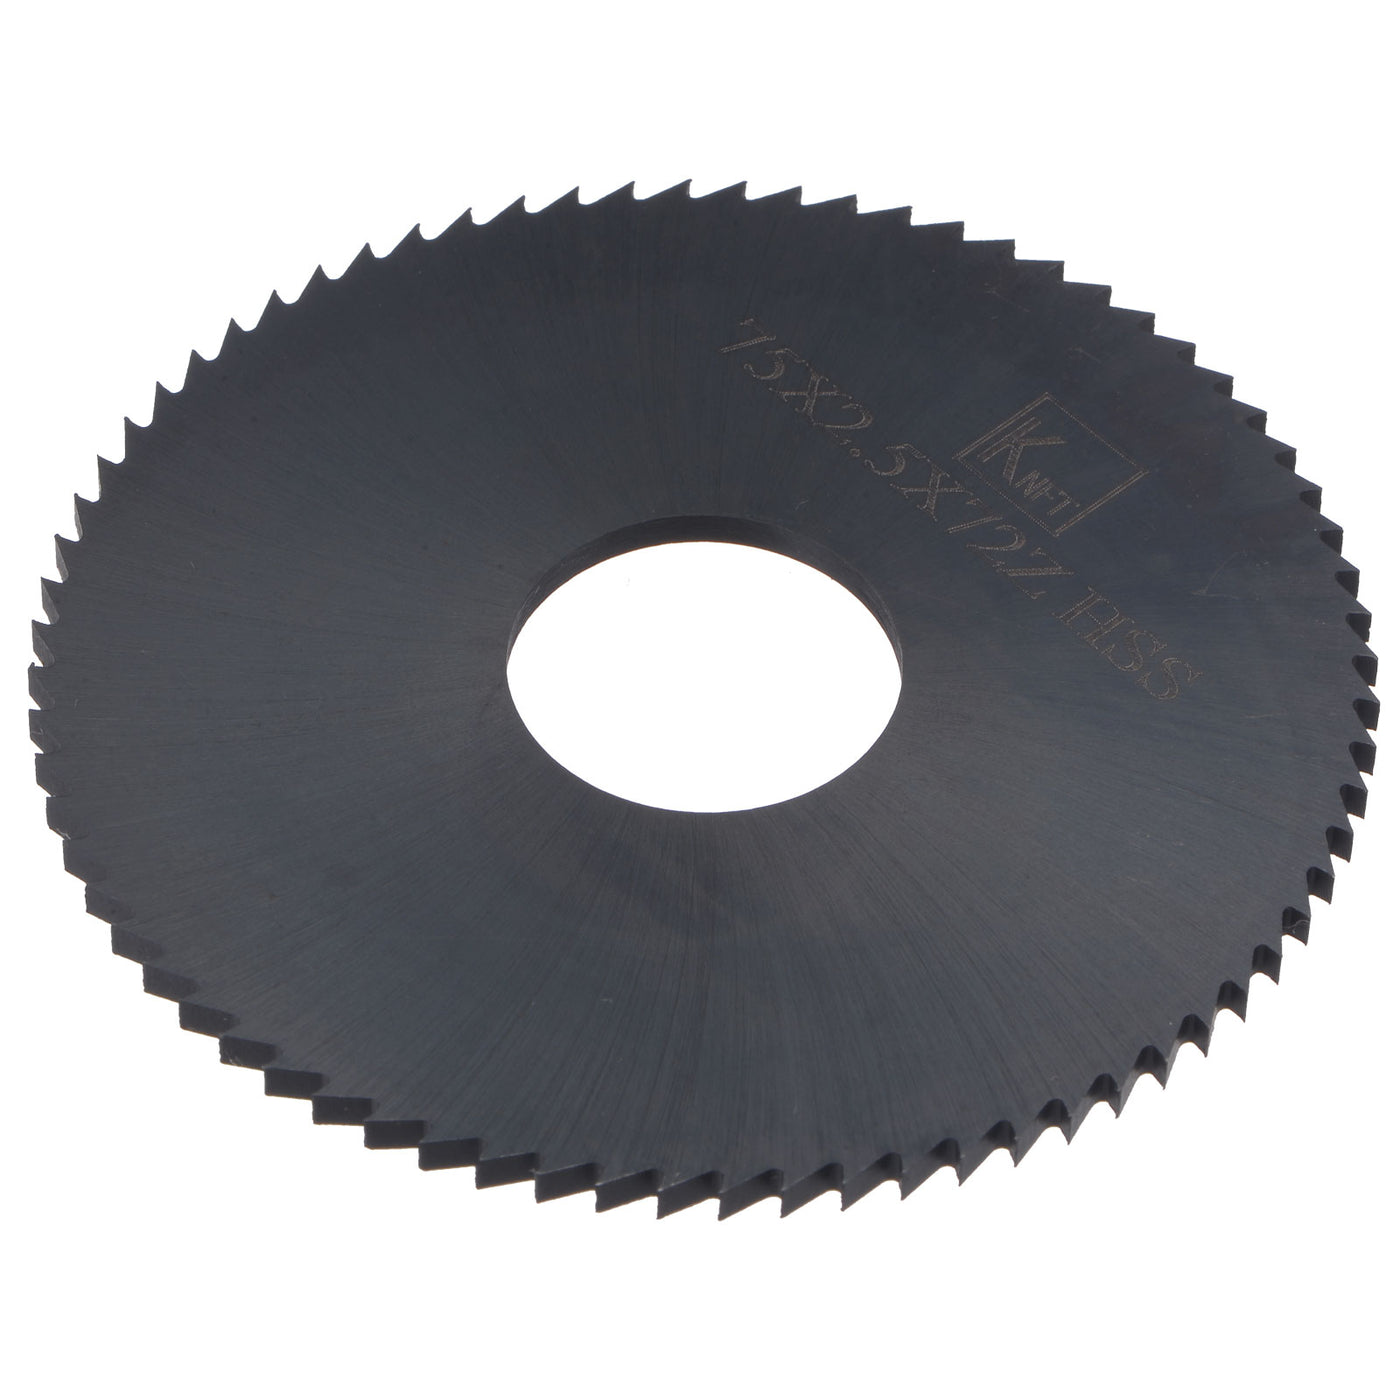 Uxcell Uxcell 75mm Dia 22mm Arbor 1.5mm Thick 72 Tooth Nitriding Circular Saw Blade Cutter